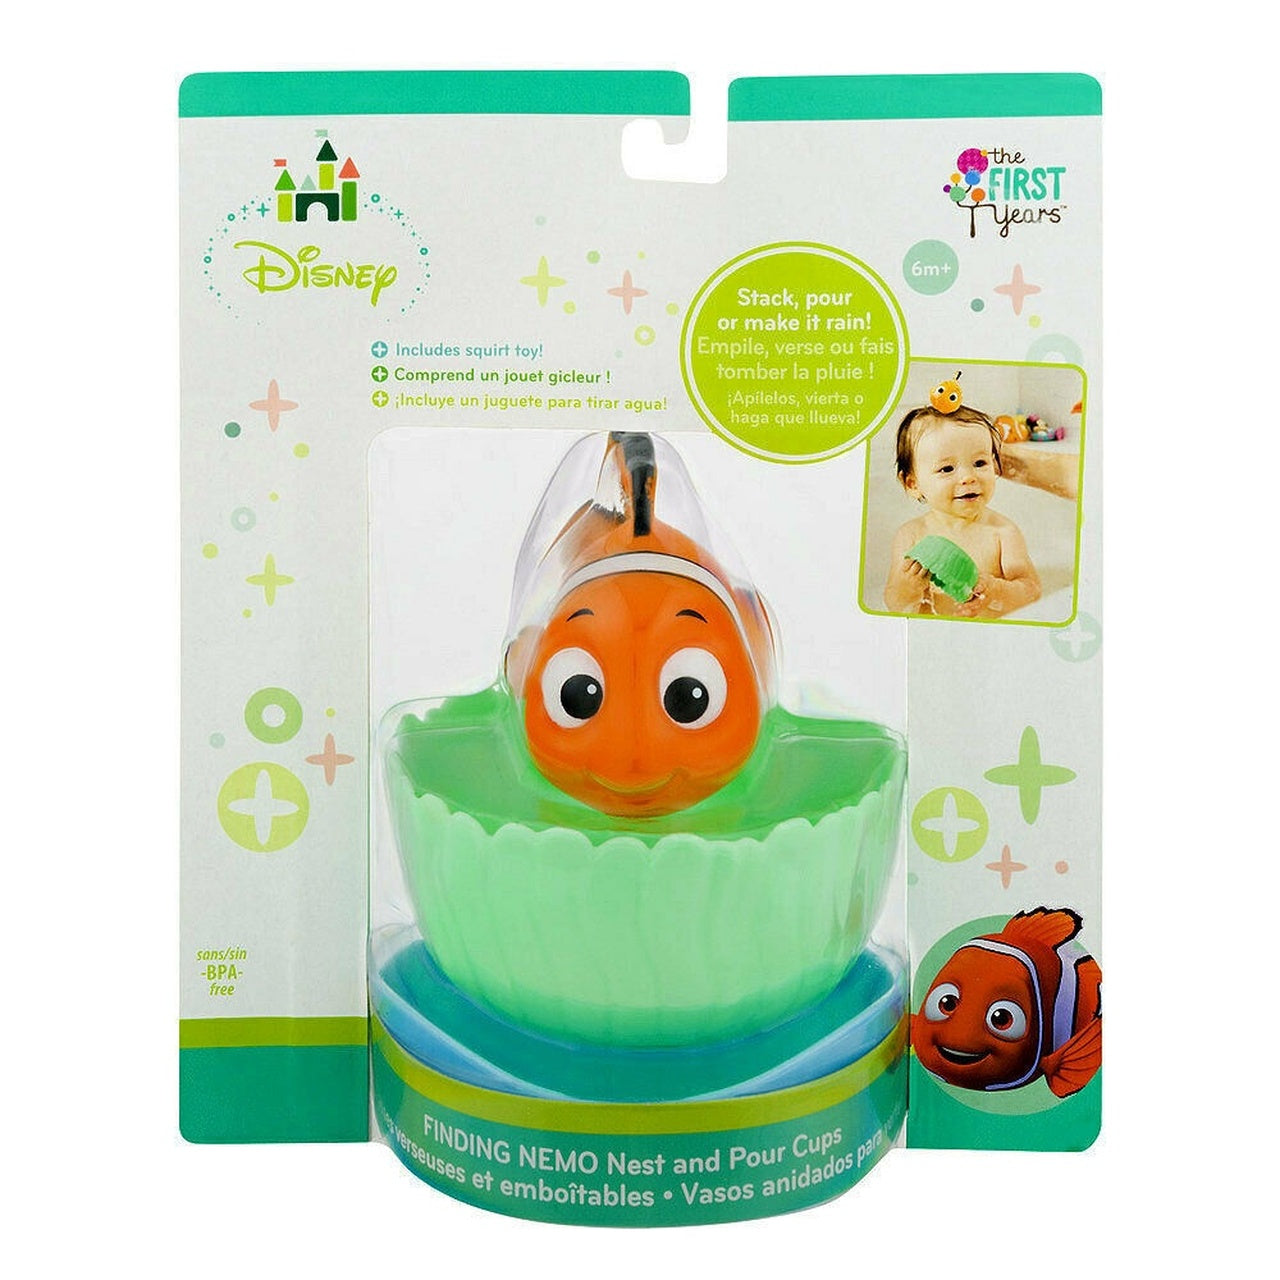 Disney / Pixar Finding Nemo 2-pk. Insulated Sippy Cups by The First Years